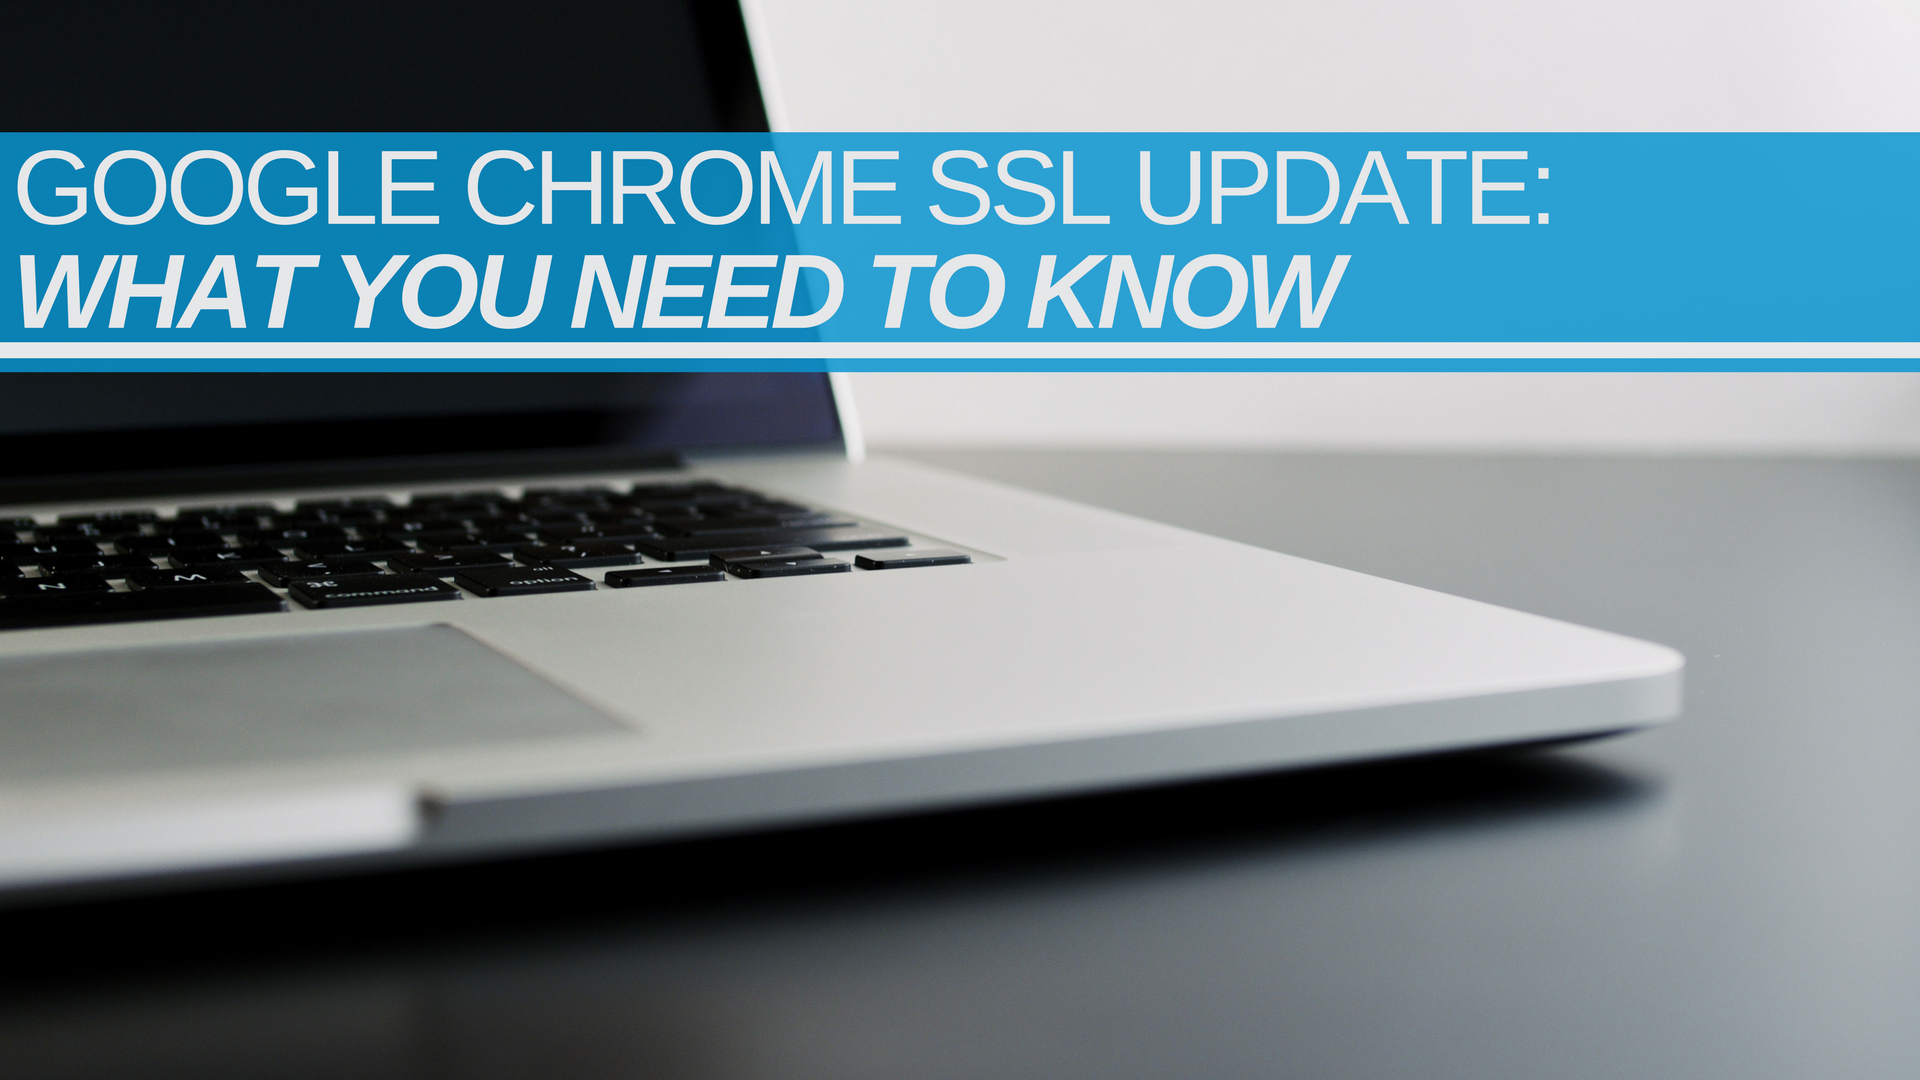 Google Chrome SSL Update: what you need to know